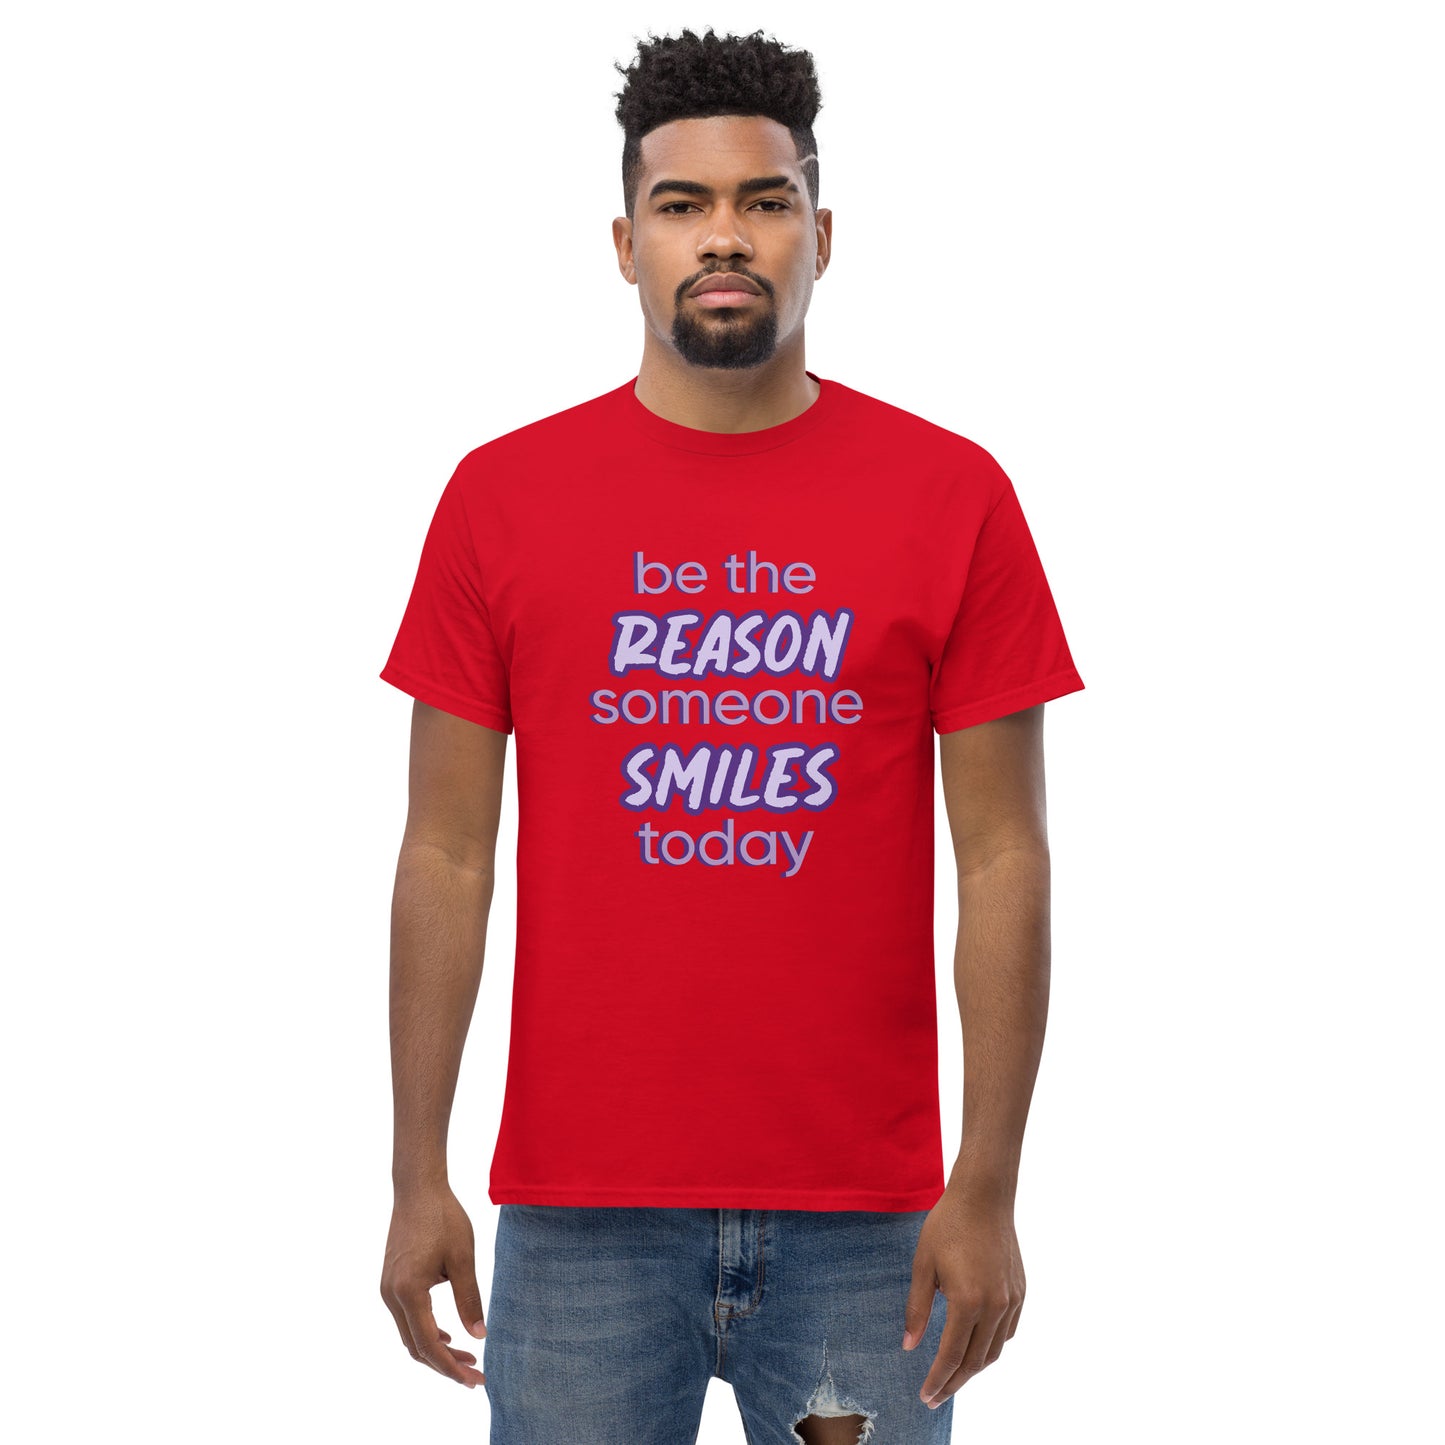 Men with red T-shirt and the quote "be the reason someone smiles today" in purple on it. 